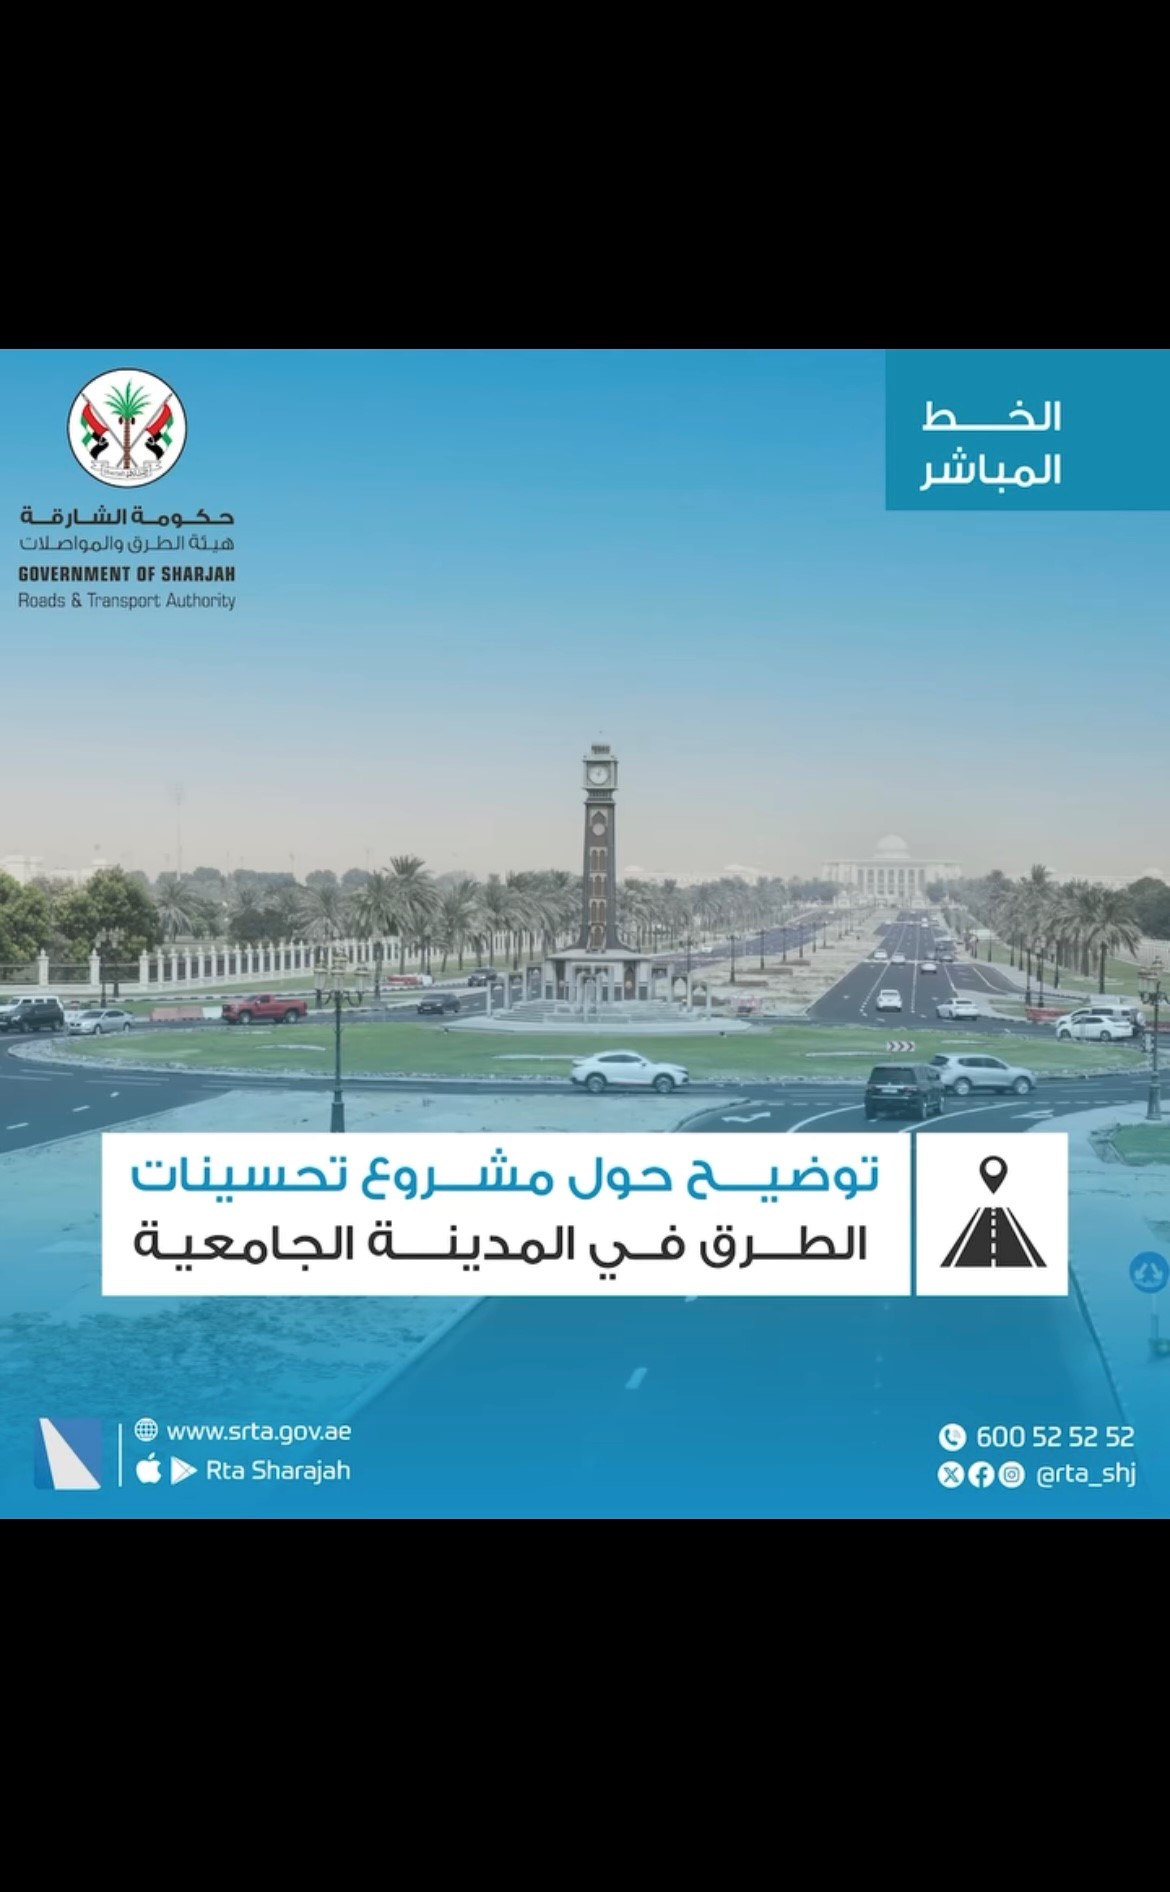  Dr. Engineer Mohsen Balwan, Director of the Traffic Engineering Department at the Authority, during a telephone conversation, provided a comprehensive clarification about the road improvement project in the University City